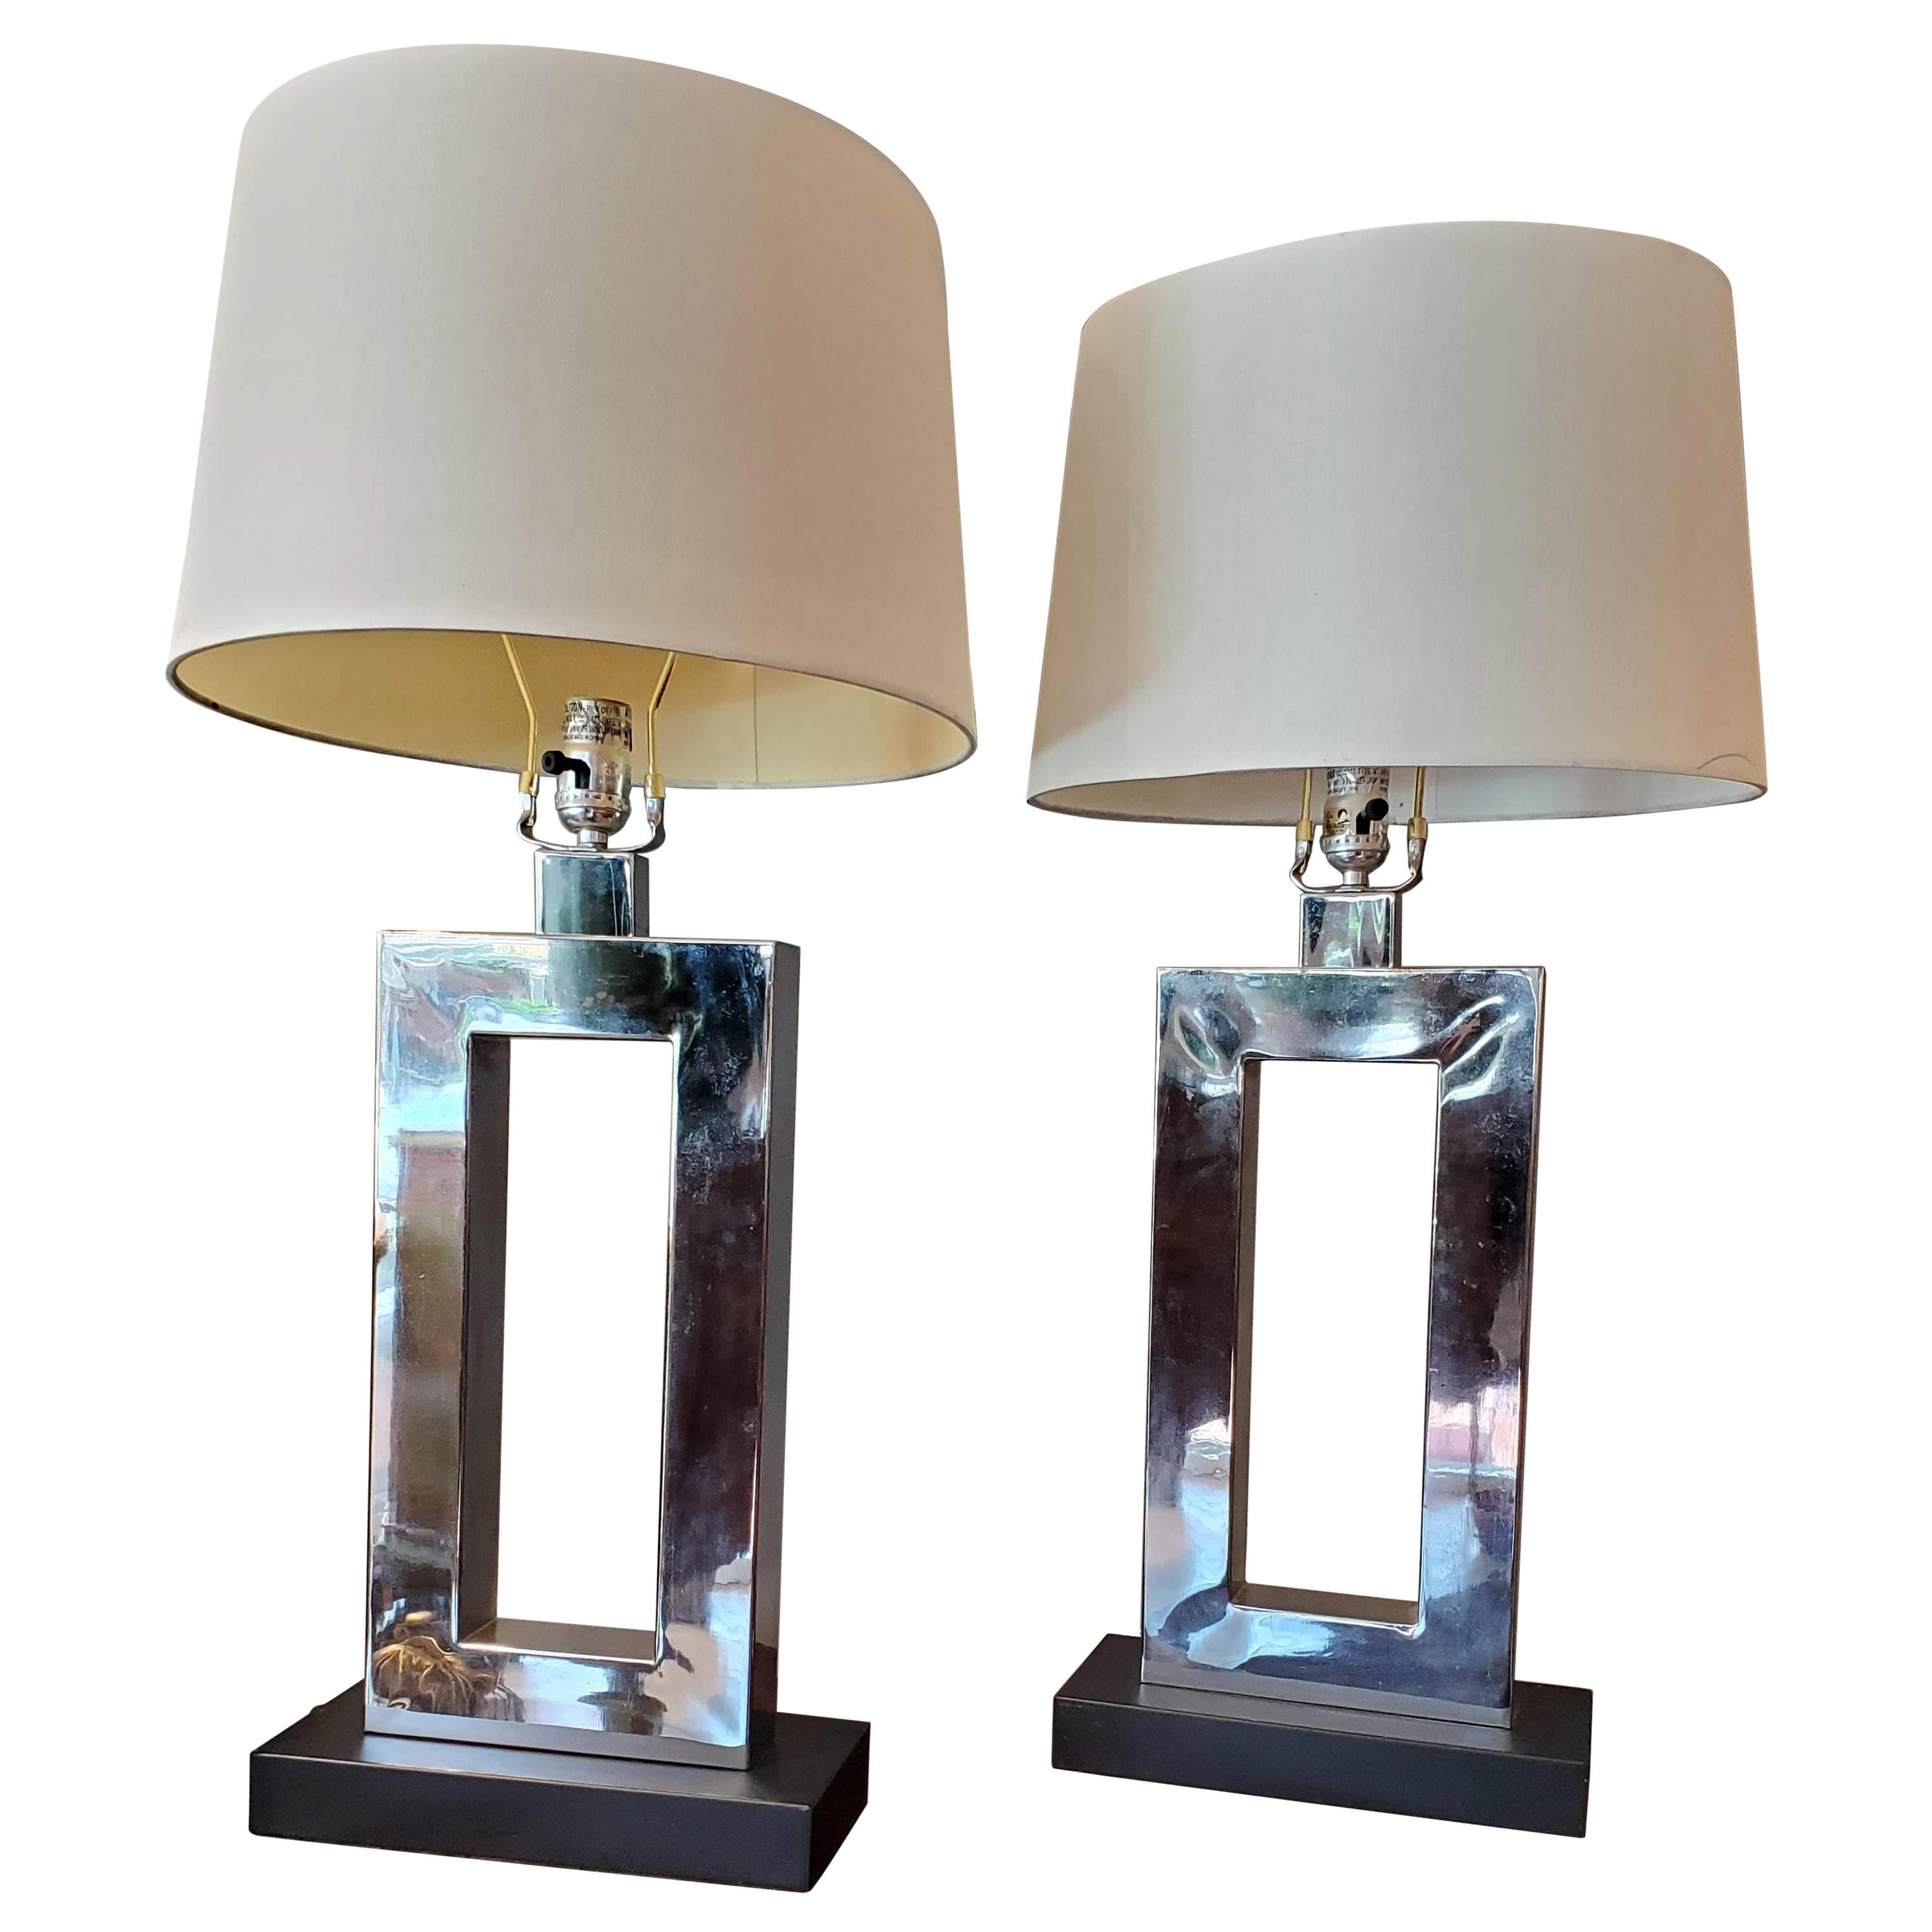 Pair of Mid-Century Modern Chrome with Black Base Lamps